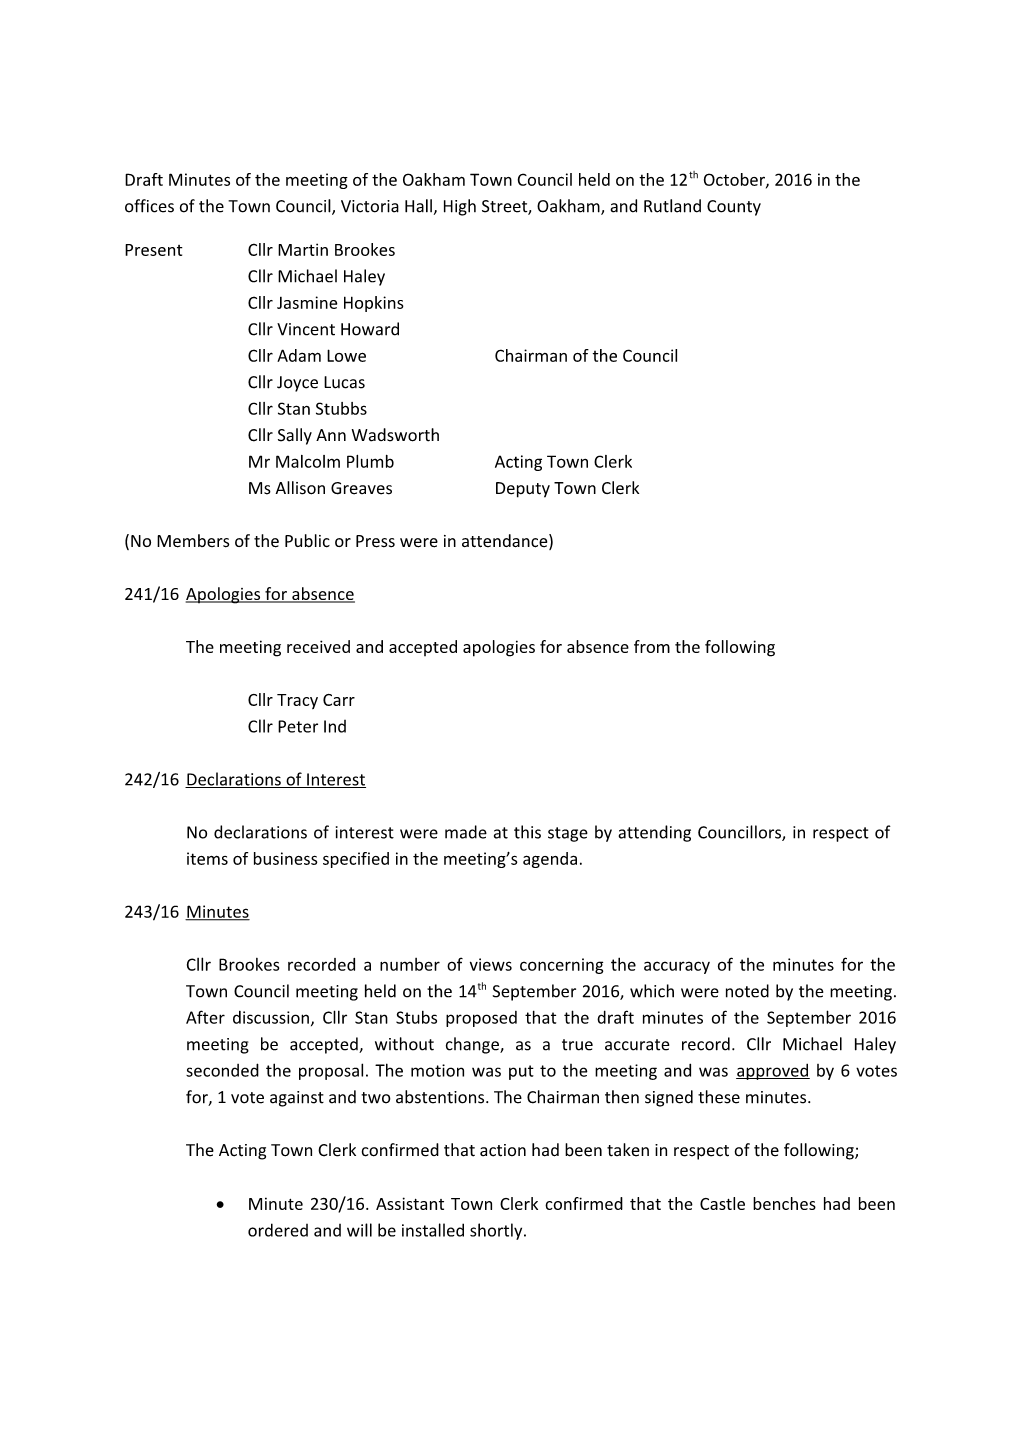 Draft Minutes of the Meeting of the Oakham Town Council Held on the 12Th October, 2016